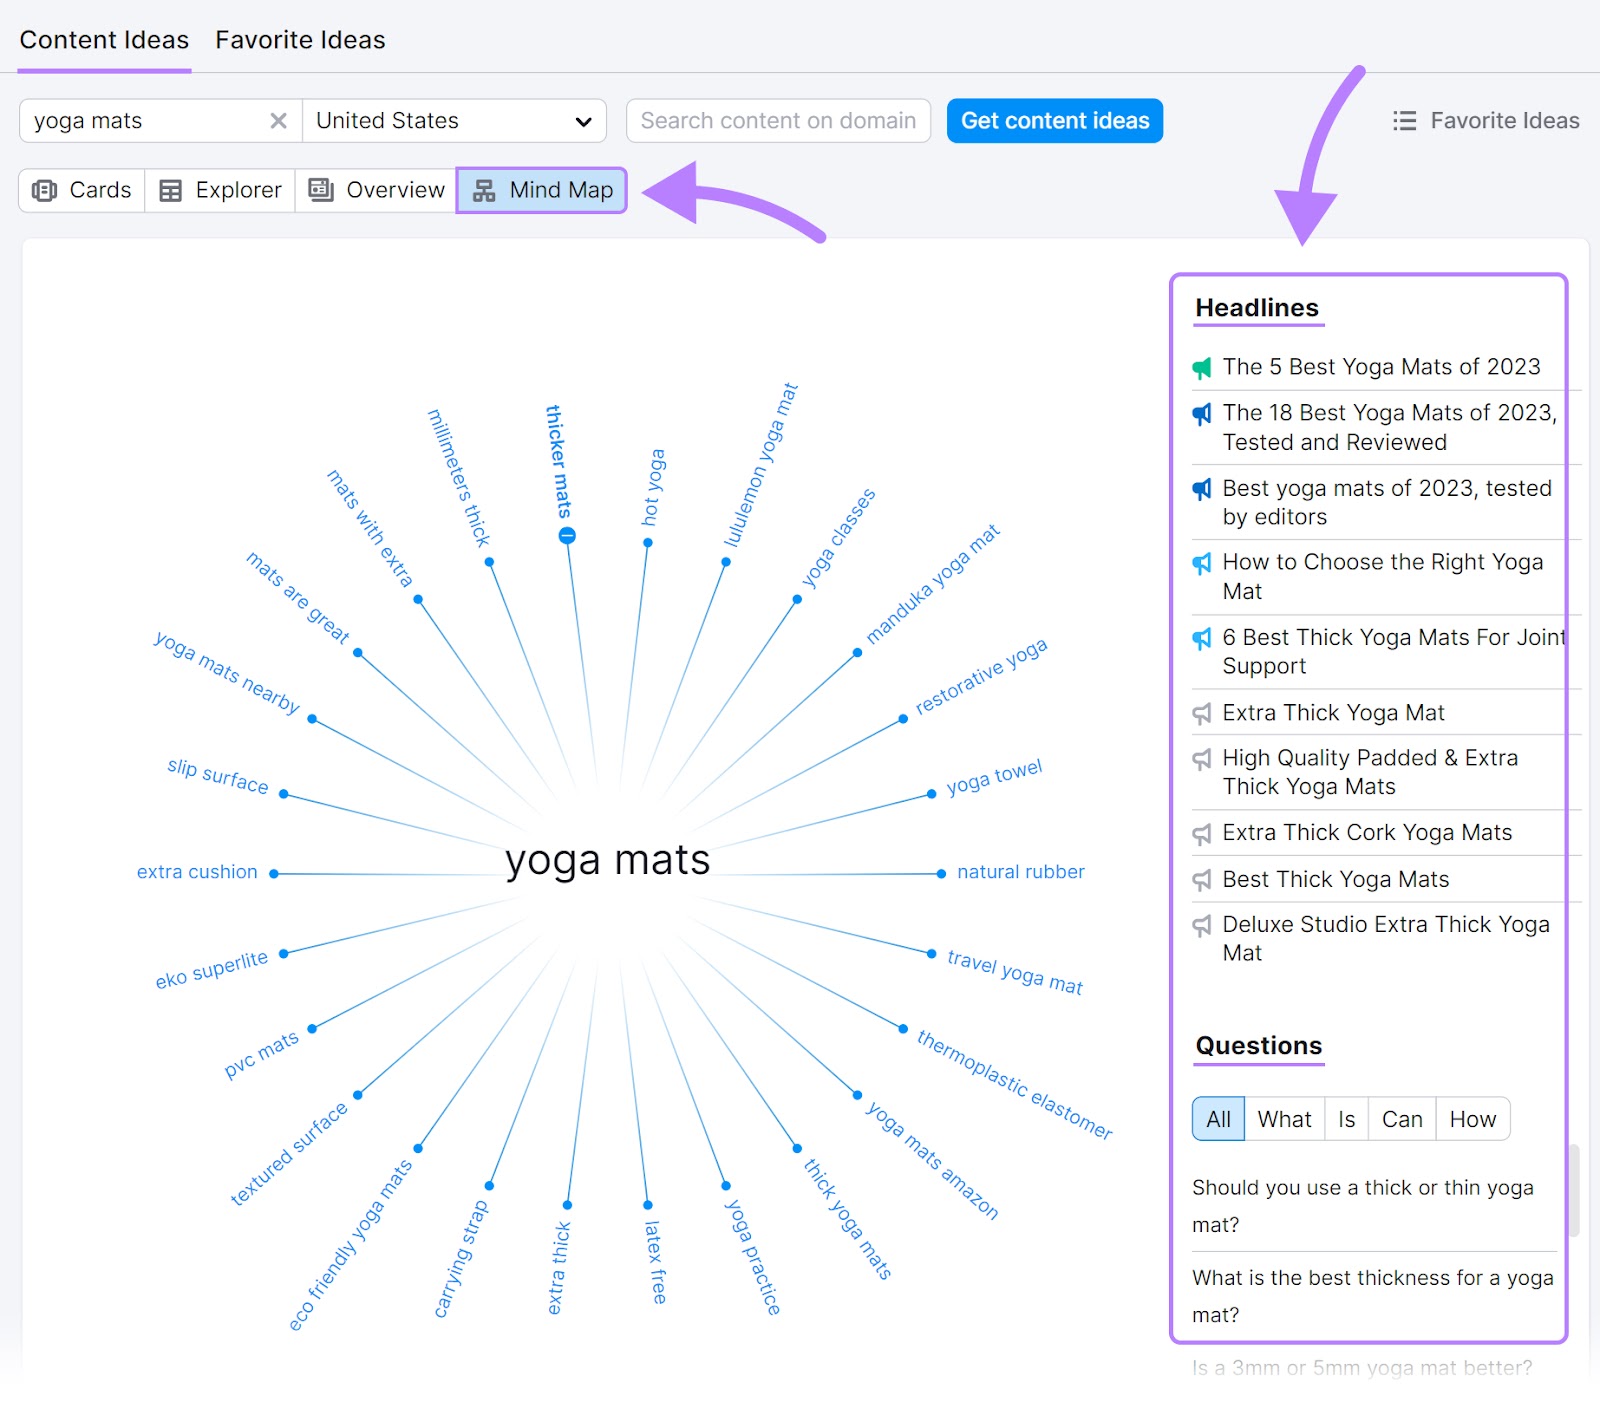 "Mind Map" for "yoga mats" in Topic Research tool